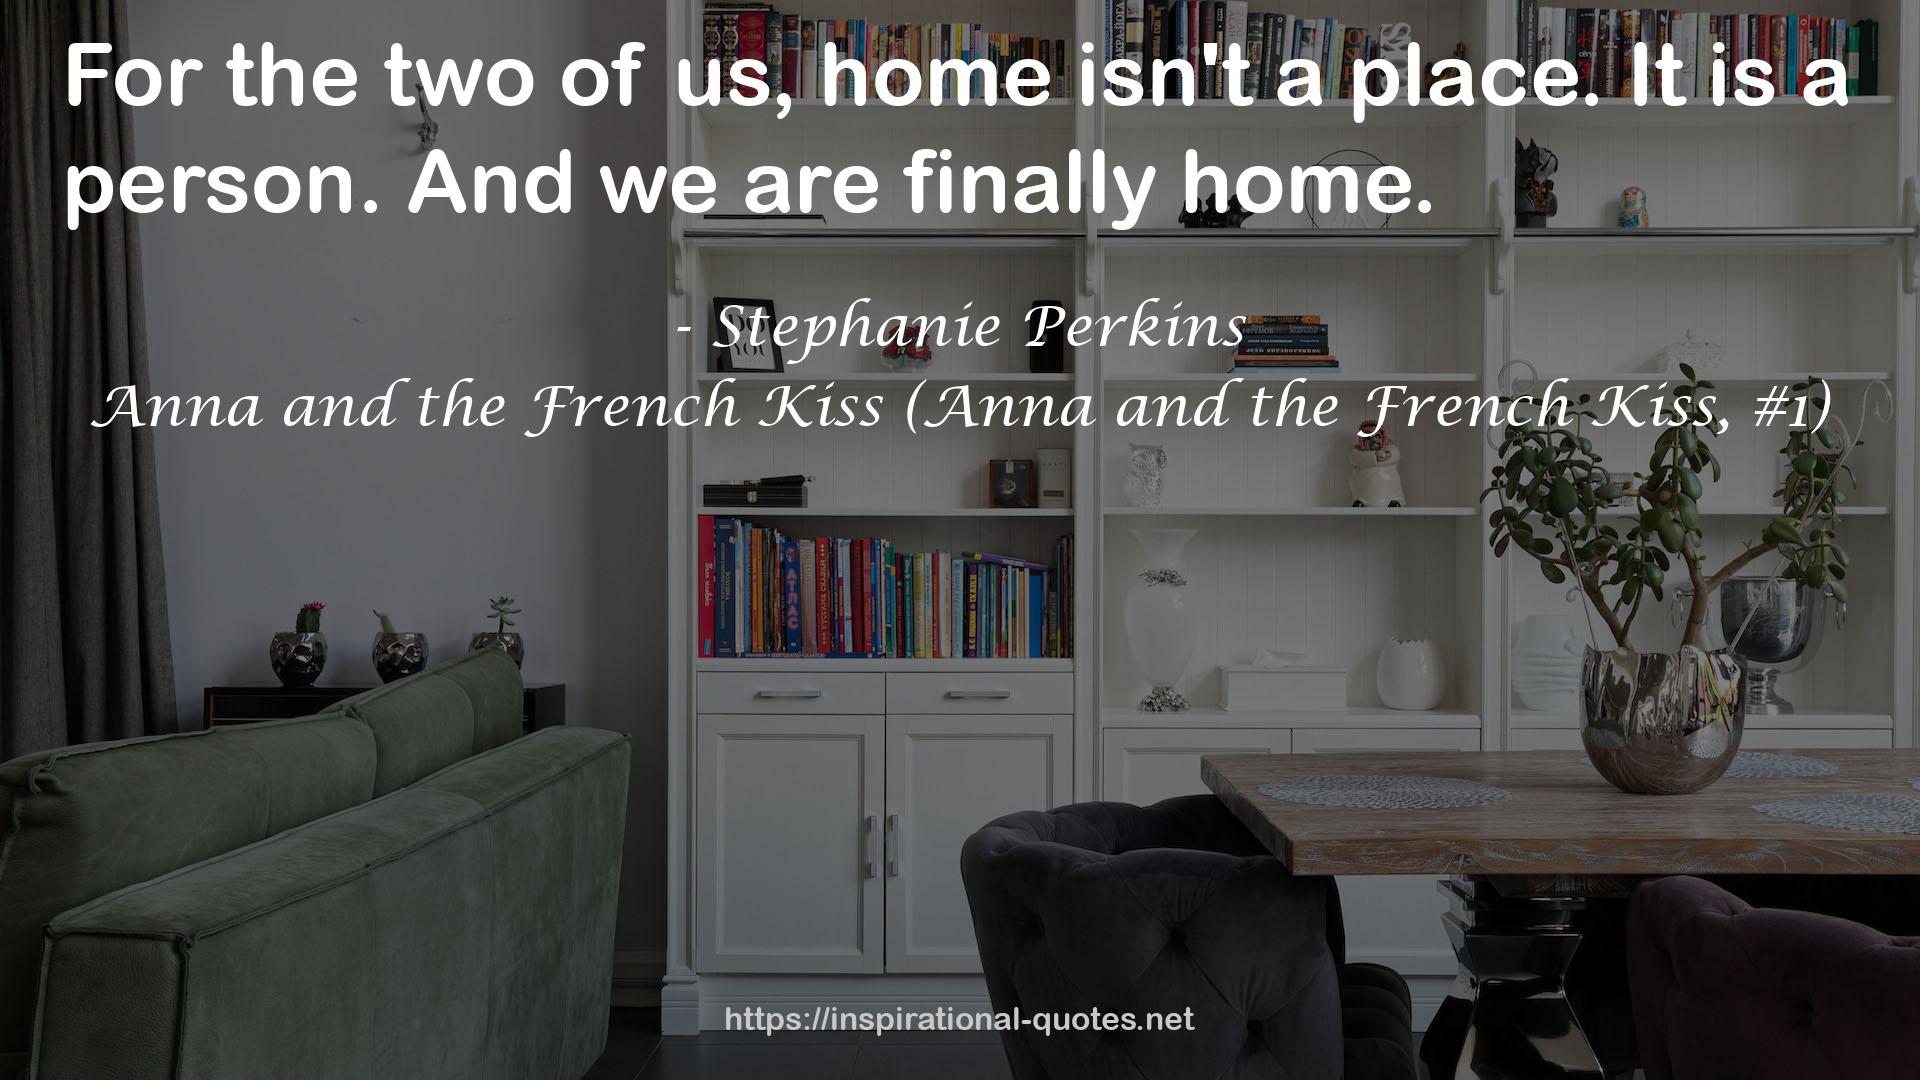 Anna and the French Kiss (Anna and the French Kiss, #1) QUOTES